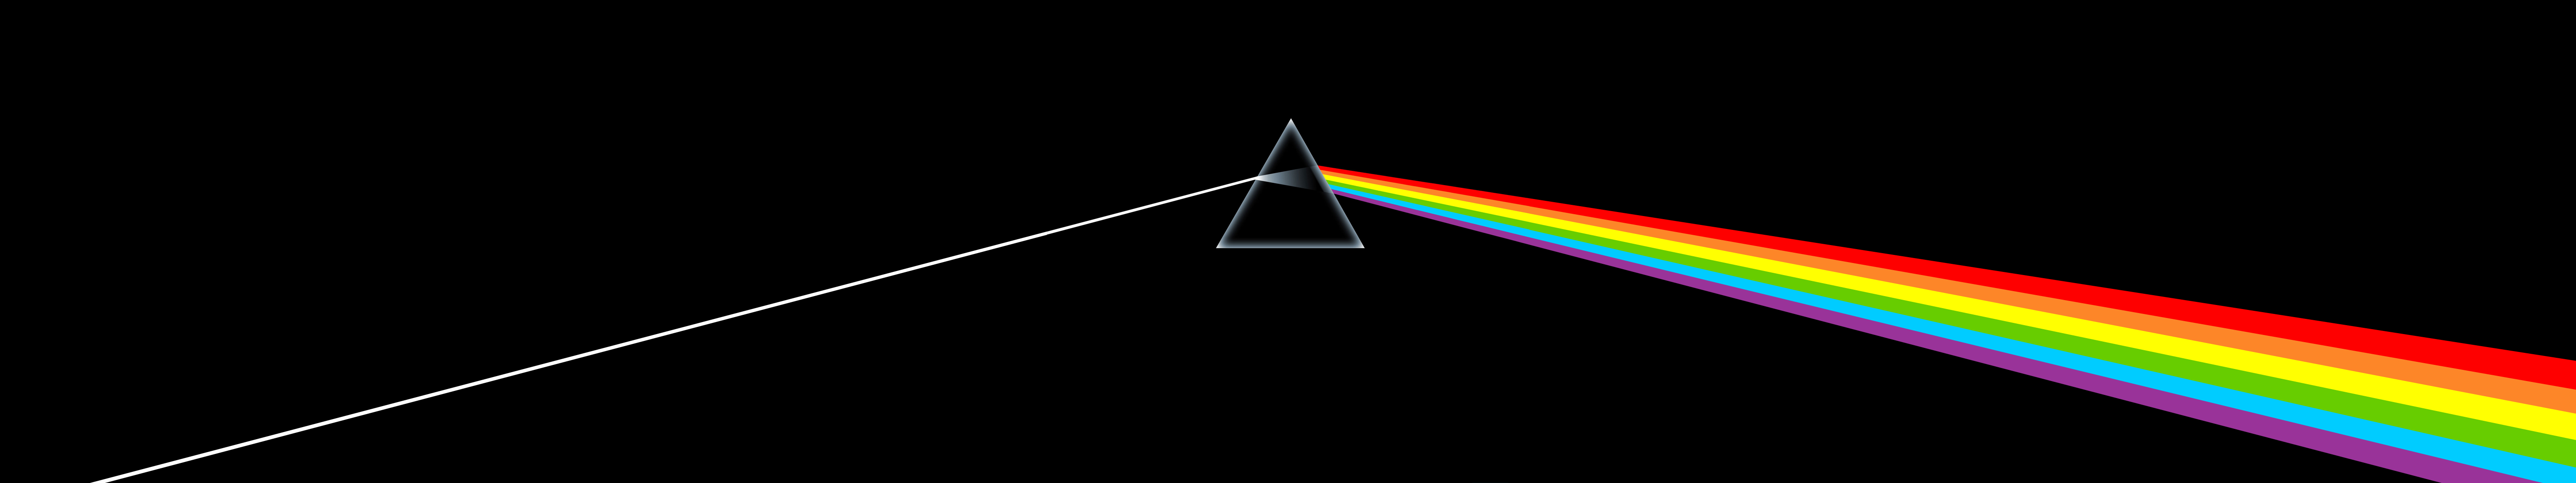 General 5760x1080 prism Pink Floyd black The Dark Side of the Moon simple background music triangle geometric figures band